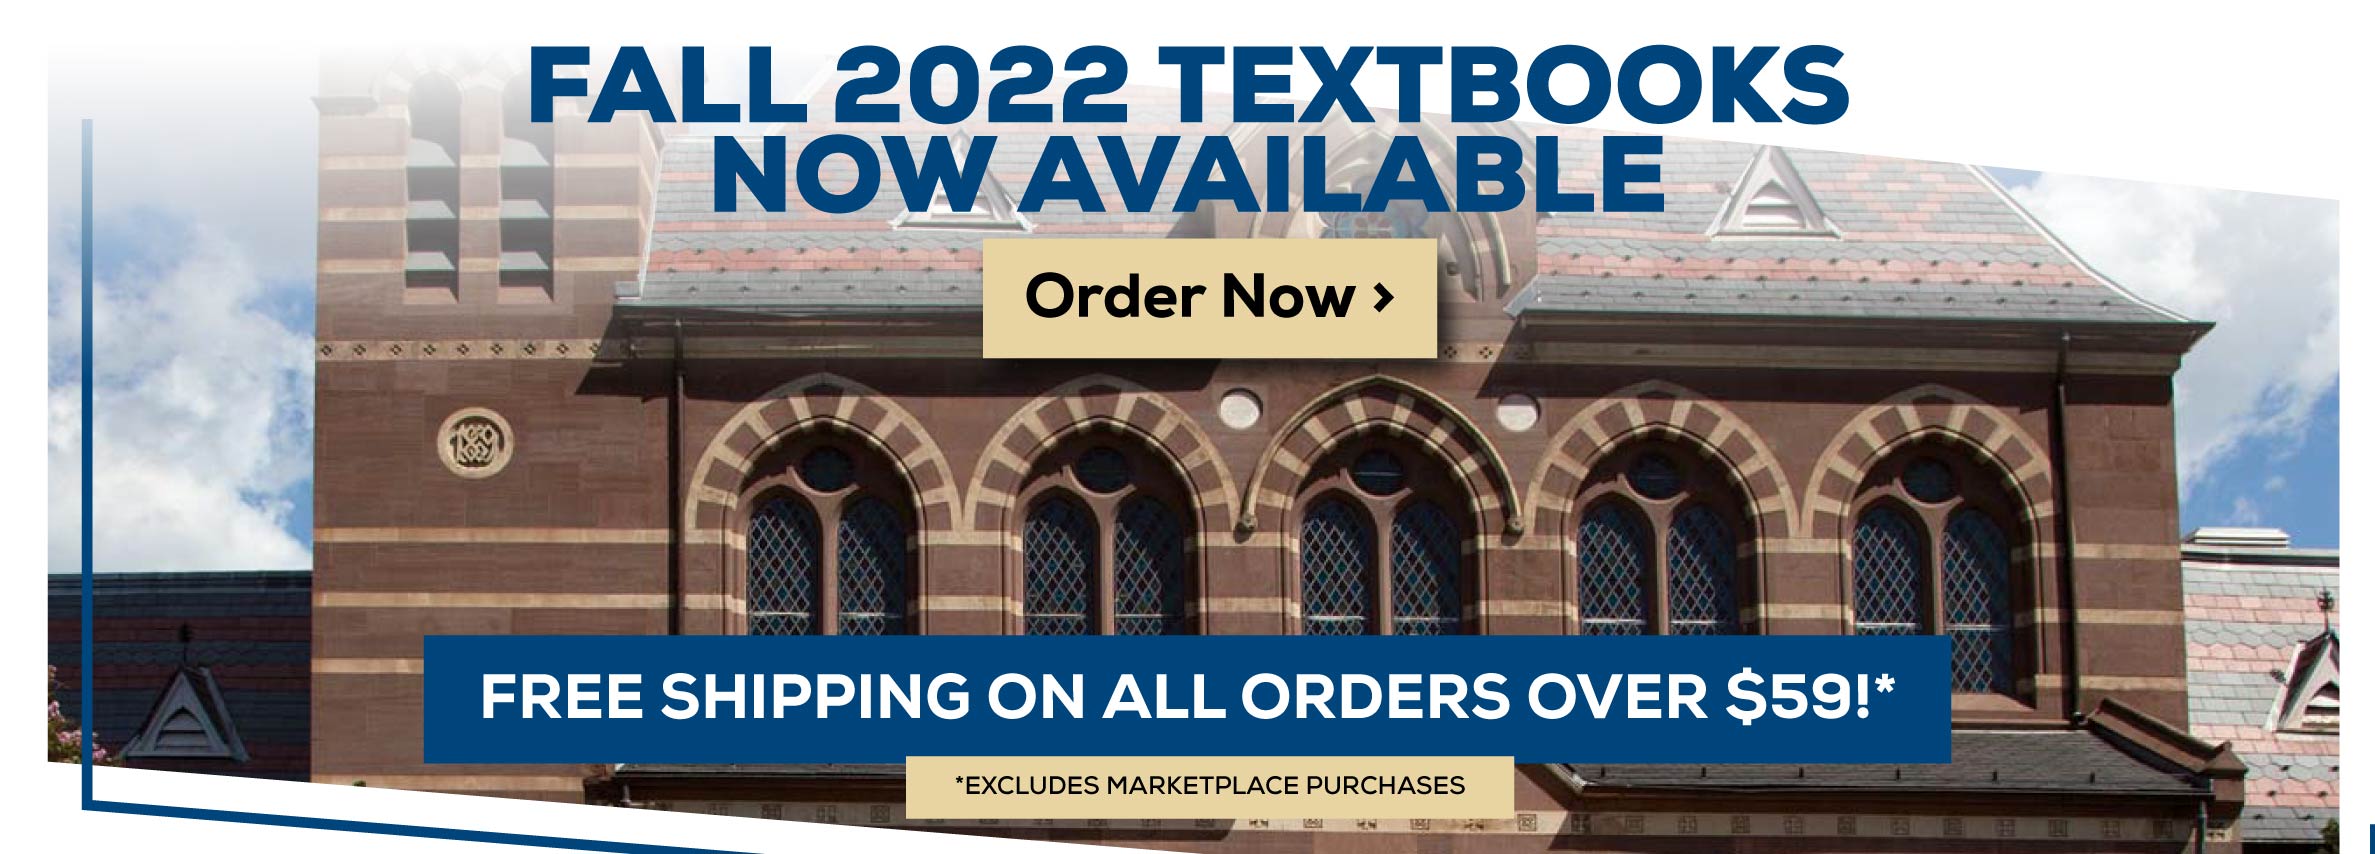 Fall 2022 Textbooks Now Available Order Now - Free Shipping on Orders Over $59!* Excludes Marketplace Purchases